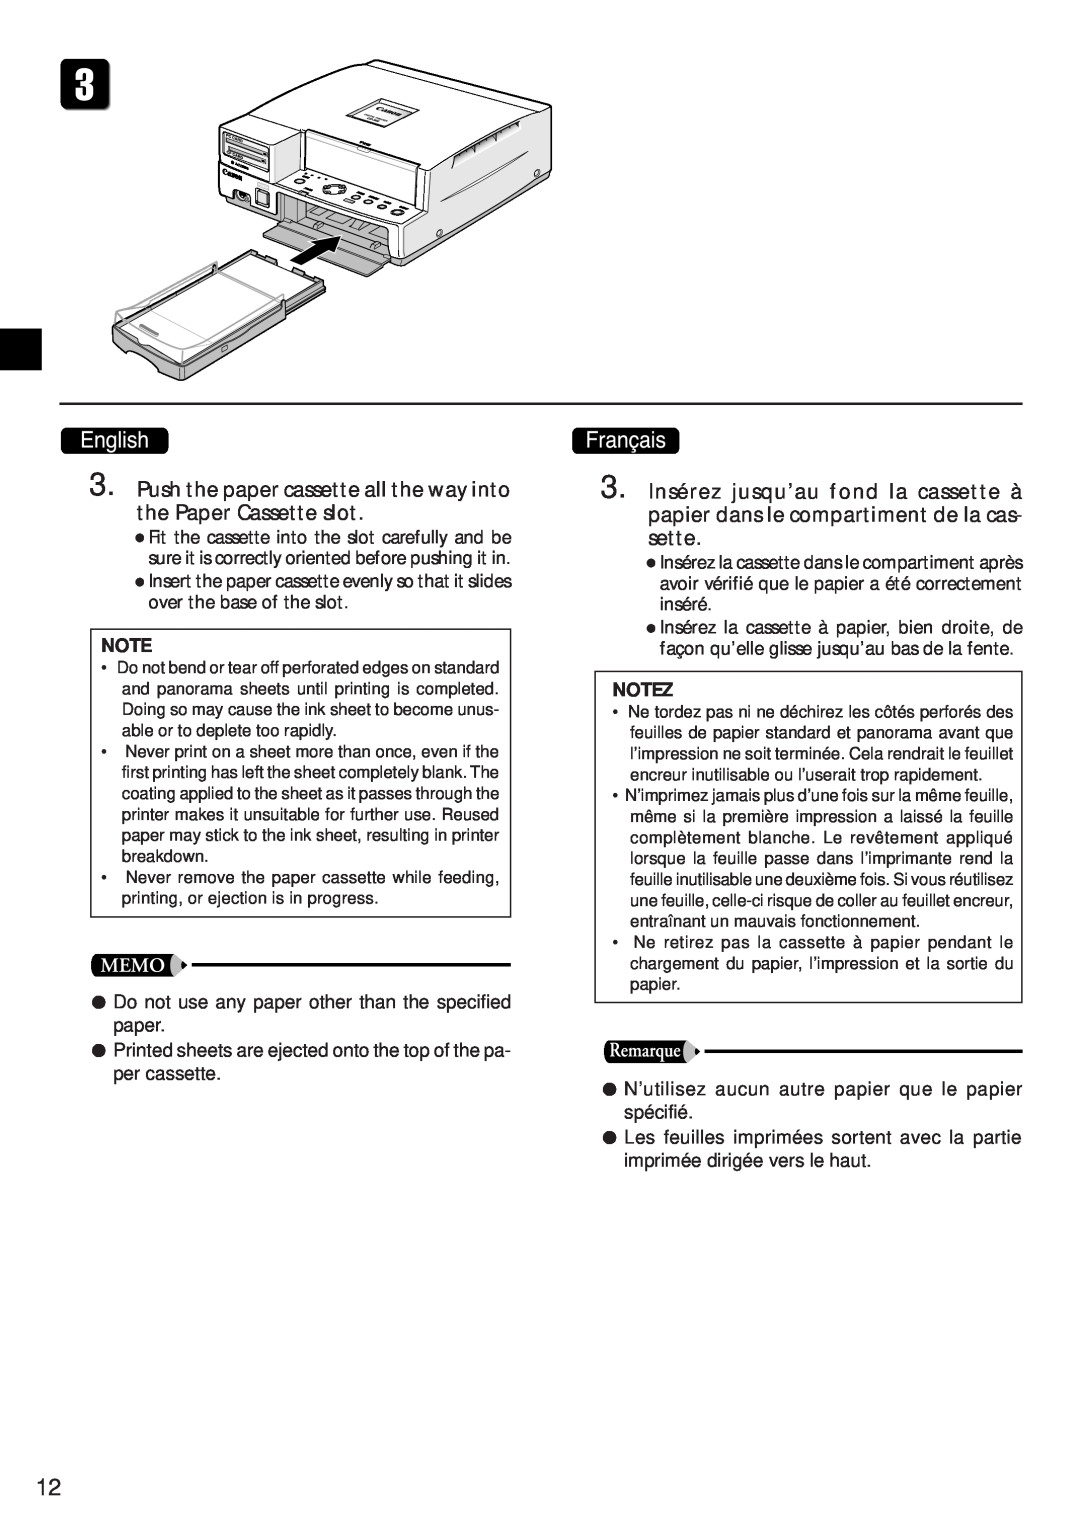 Canon CD-300 manual Push the paper cassette all the way into the Paper Cassette slot, Notez 